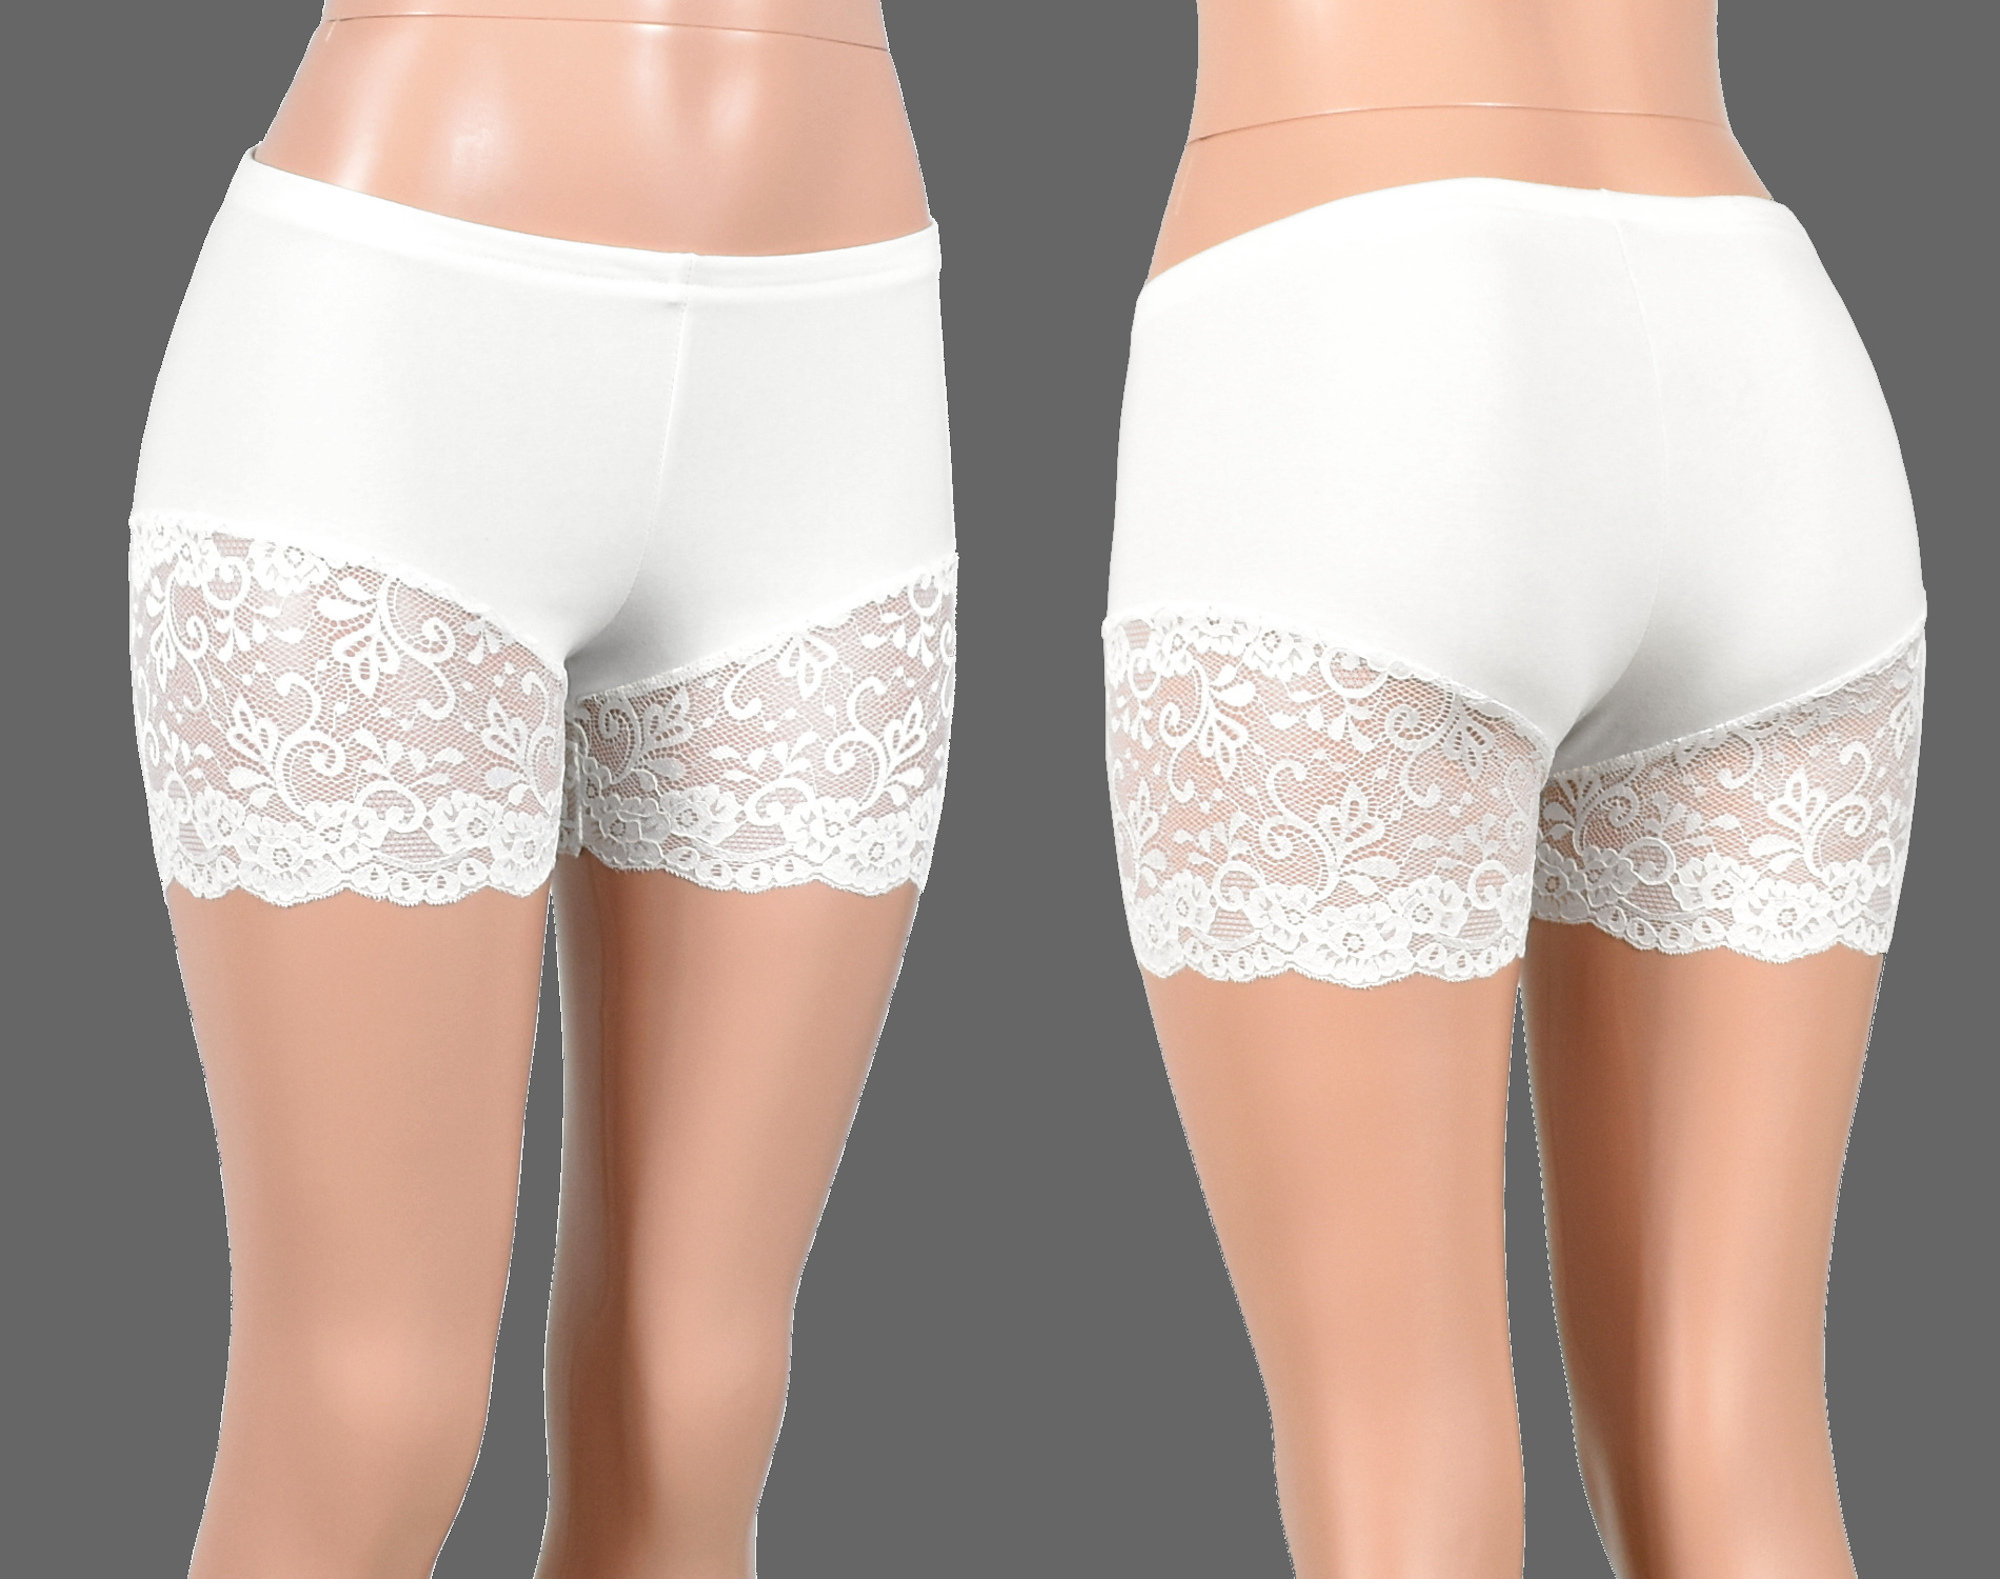 Plus Size Lace Thigh Length Lace Shorts With Anti Chafing Technology For  Women From Crosslery, $10.24